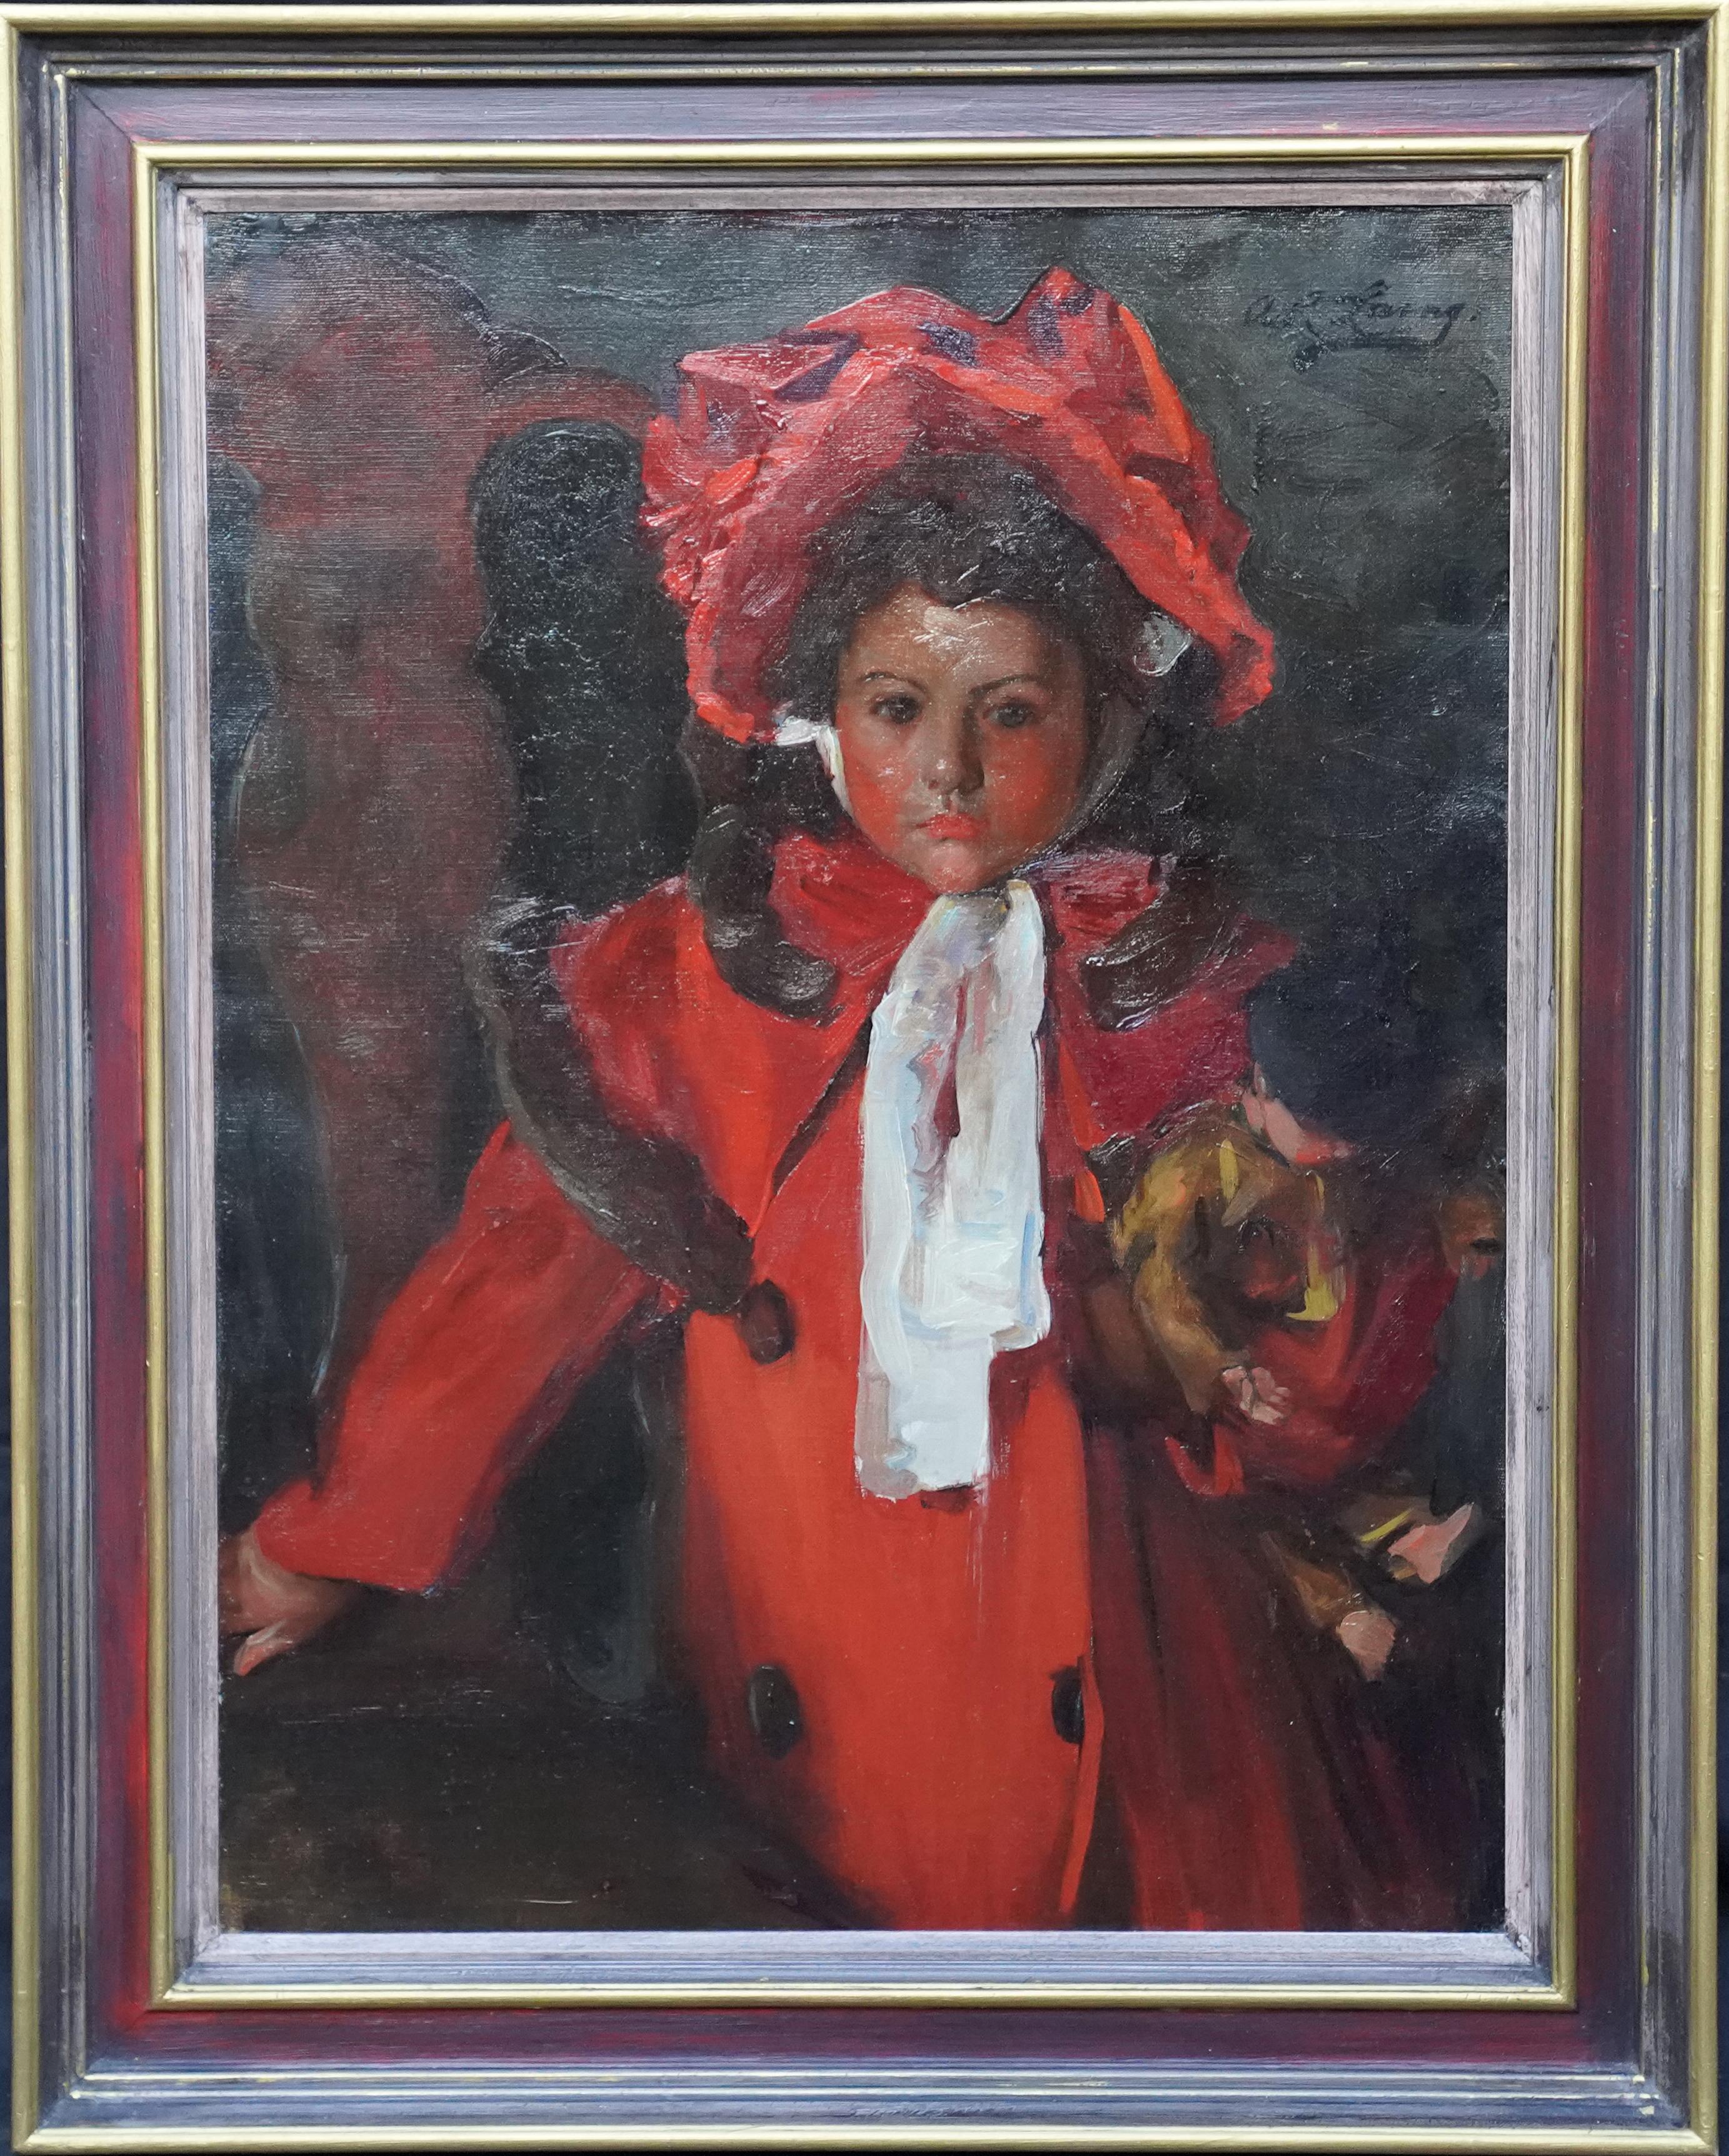 Annie Rose Laing Portrait Painting - Portrait of a Girl in Red - Scottish 1900 Glasgow Girl art oil painting